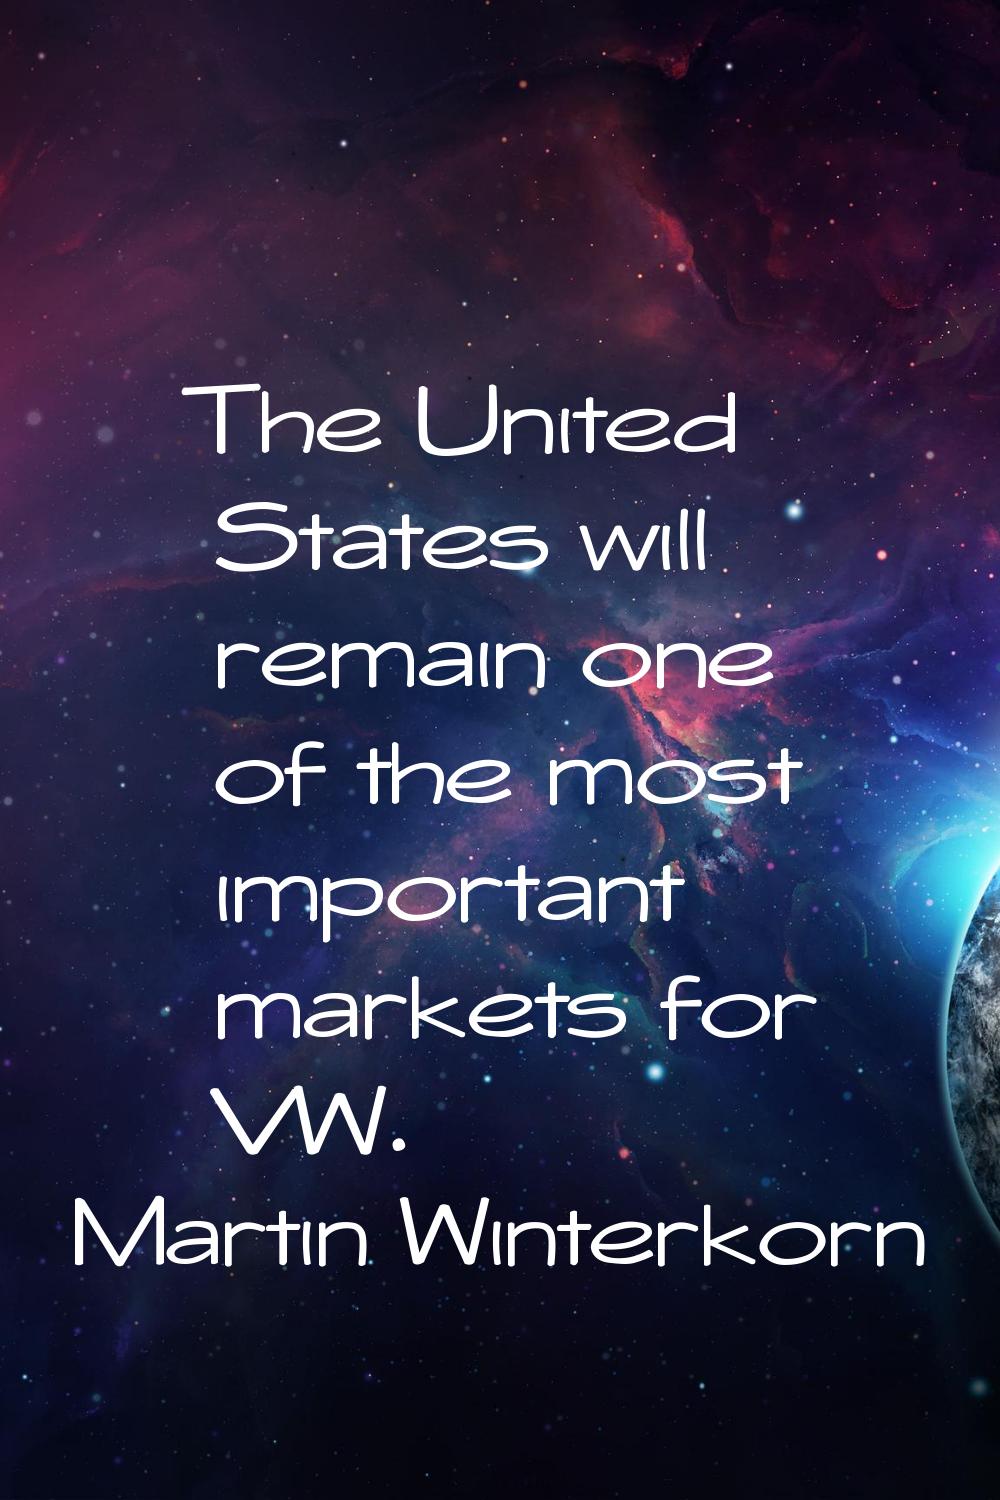 The United States will remain one of the most important markets for VW.